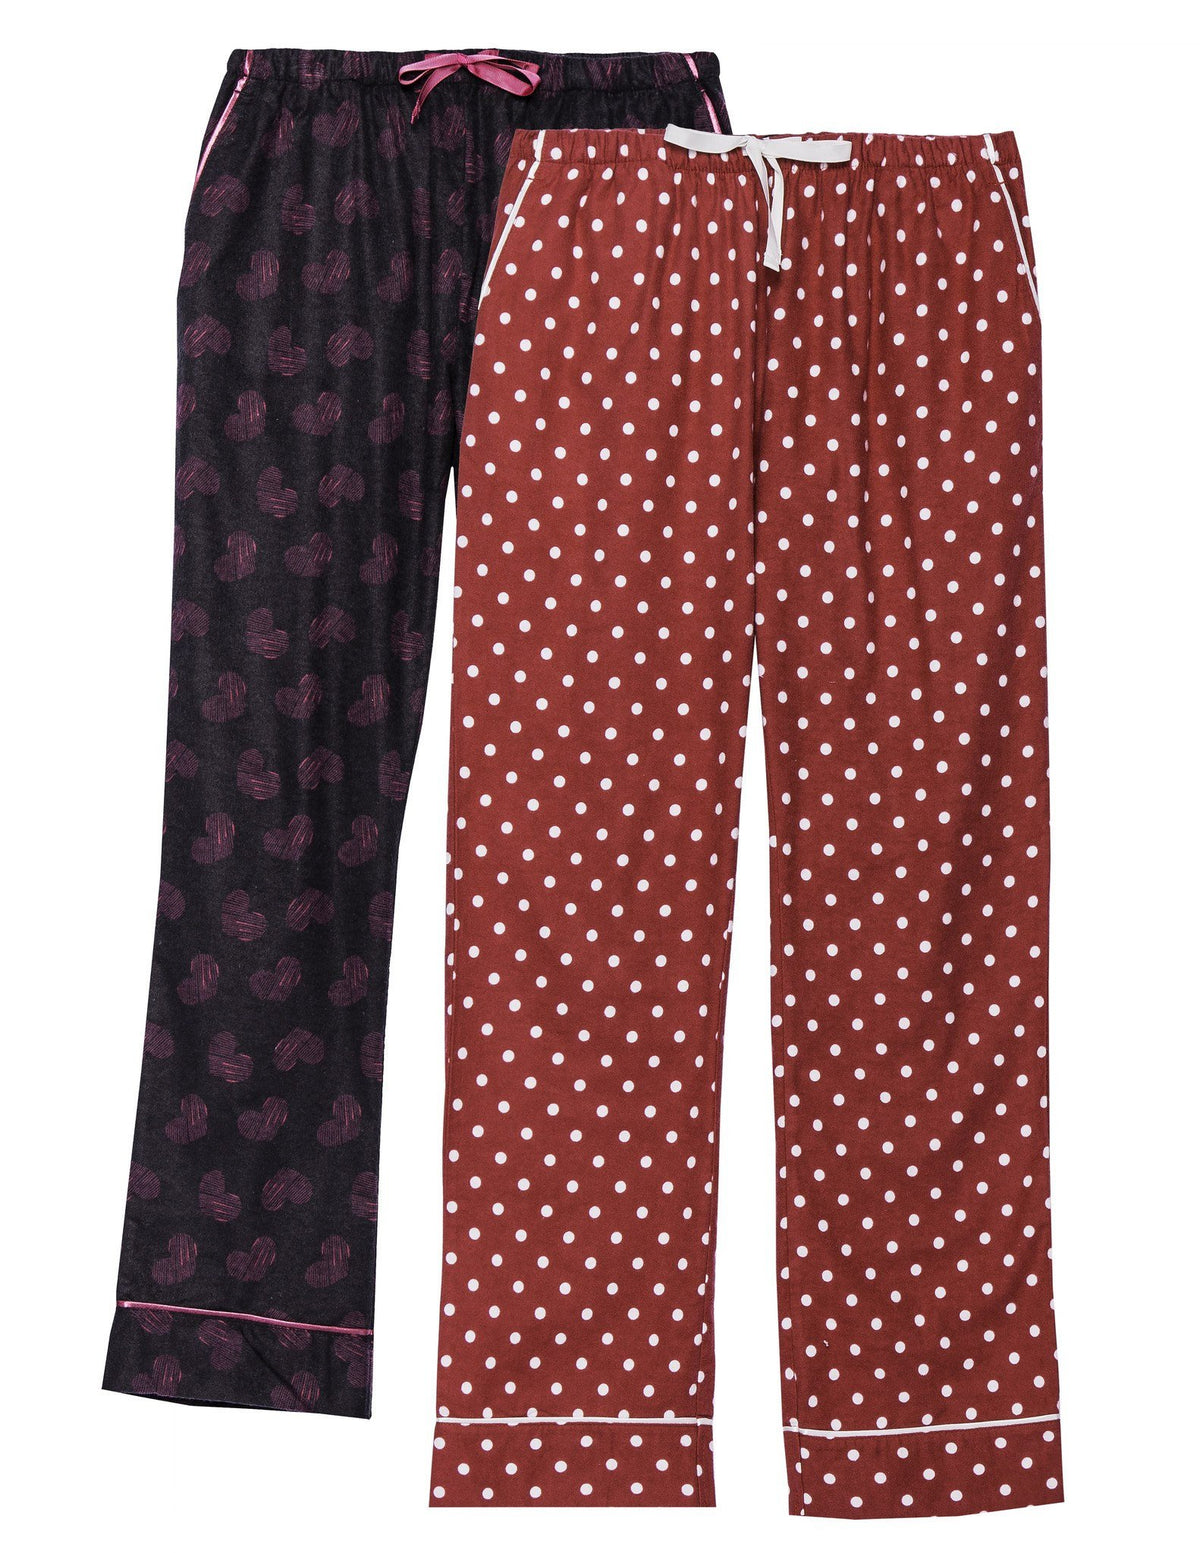 Women's 2 Pack Cotton Flannel Lounge Pants with Free Socks - 2-Pack with FREE Sock [Dots Diva/Hearts Red]